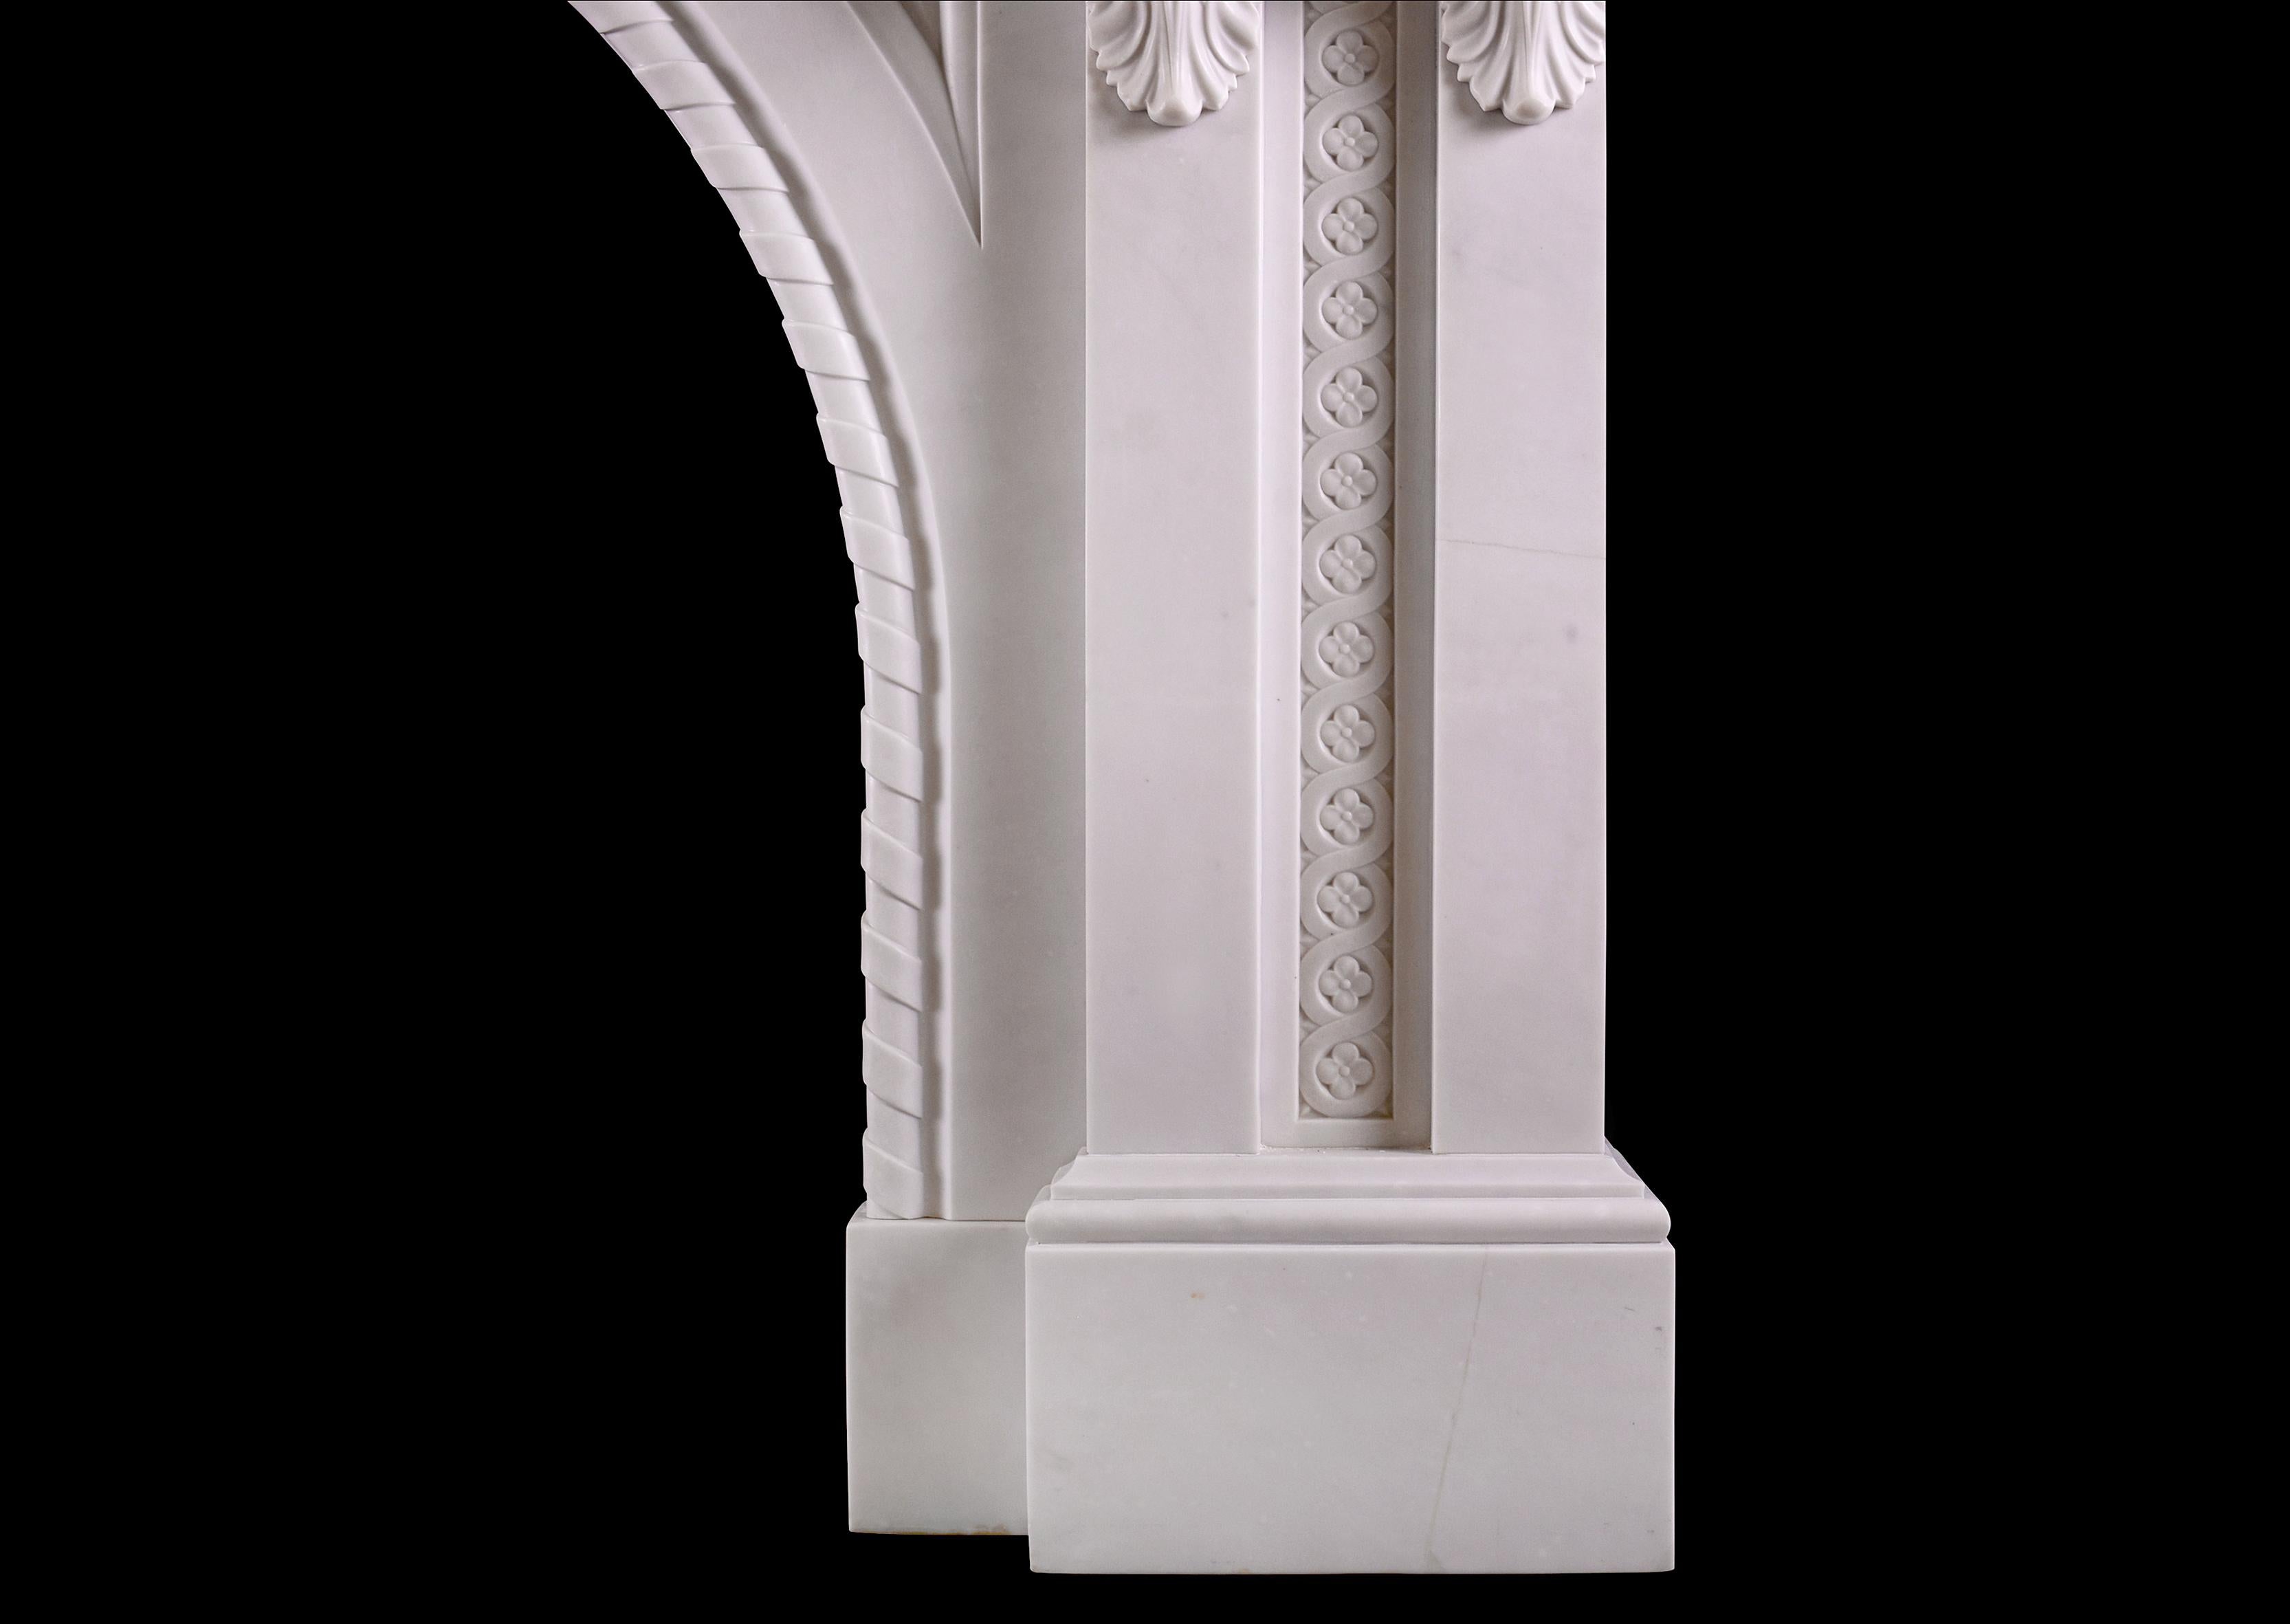 A fine quality period Victorian fireplace in Italian Statuary marble. The arched opening with panels and rope moulding, surmounted by carved guilloche motif and scrolled keystone to centre. The jambs each with pair of scrolled brackets with acanthus